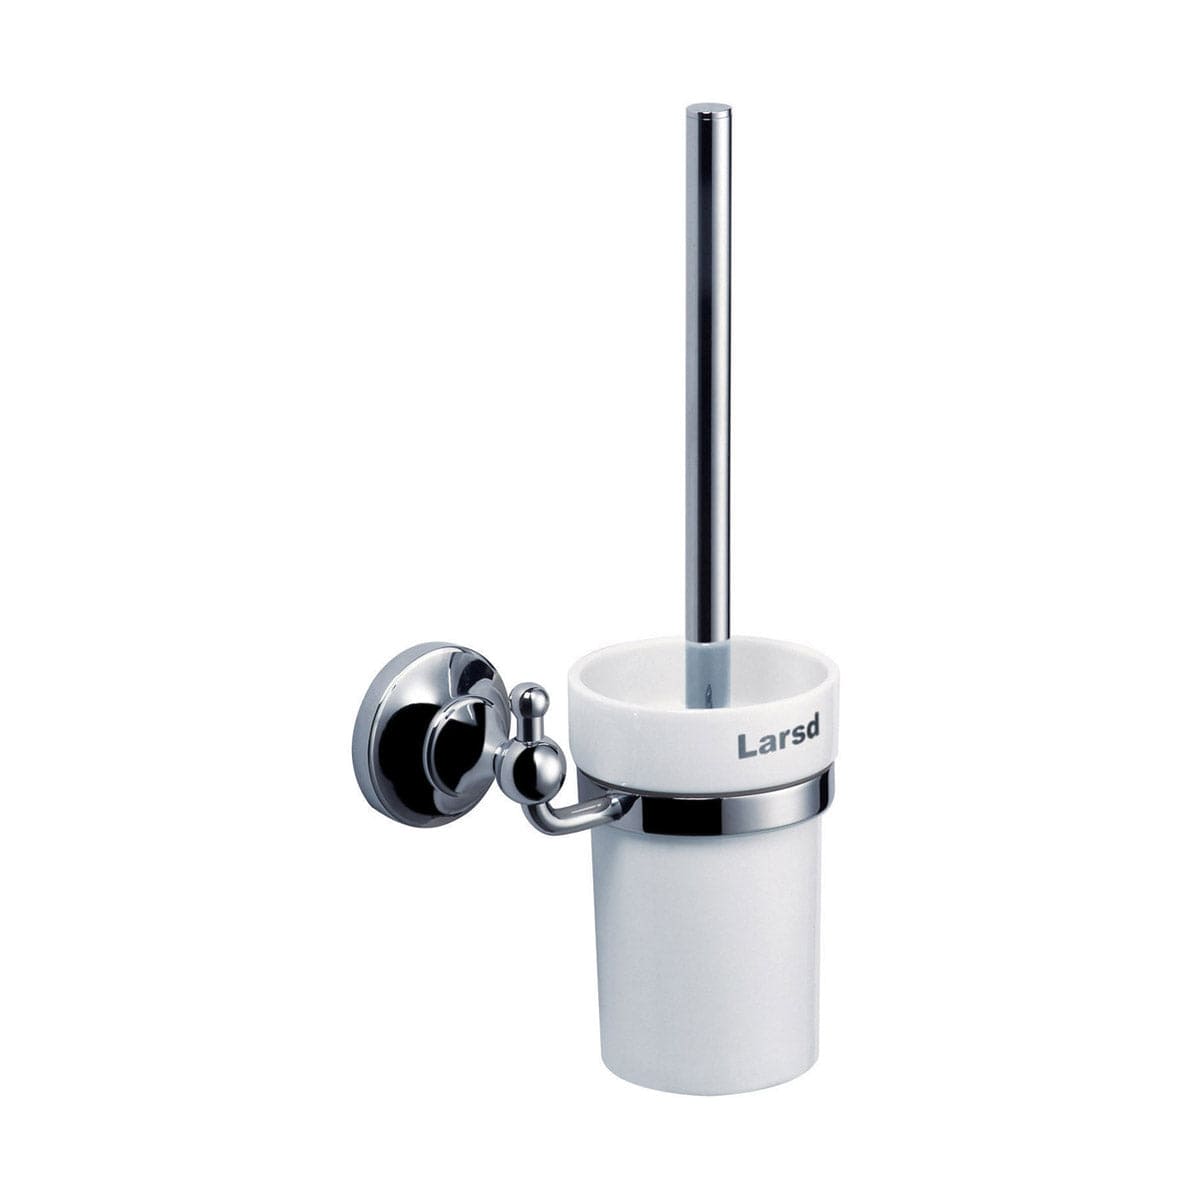 Shop Bathroom Copper Chrome Plated Toilet Brush & Ceramic Holder - 7357 | Buy Online at Supply Master Accra, Ghana Bathroom Accessories Buy Tools hardware Building materials